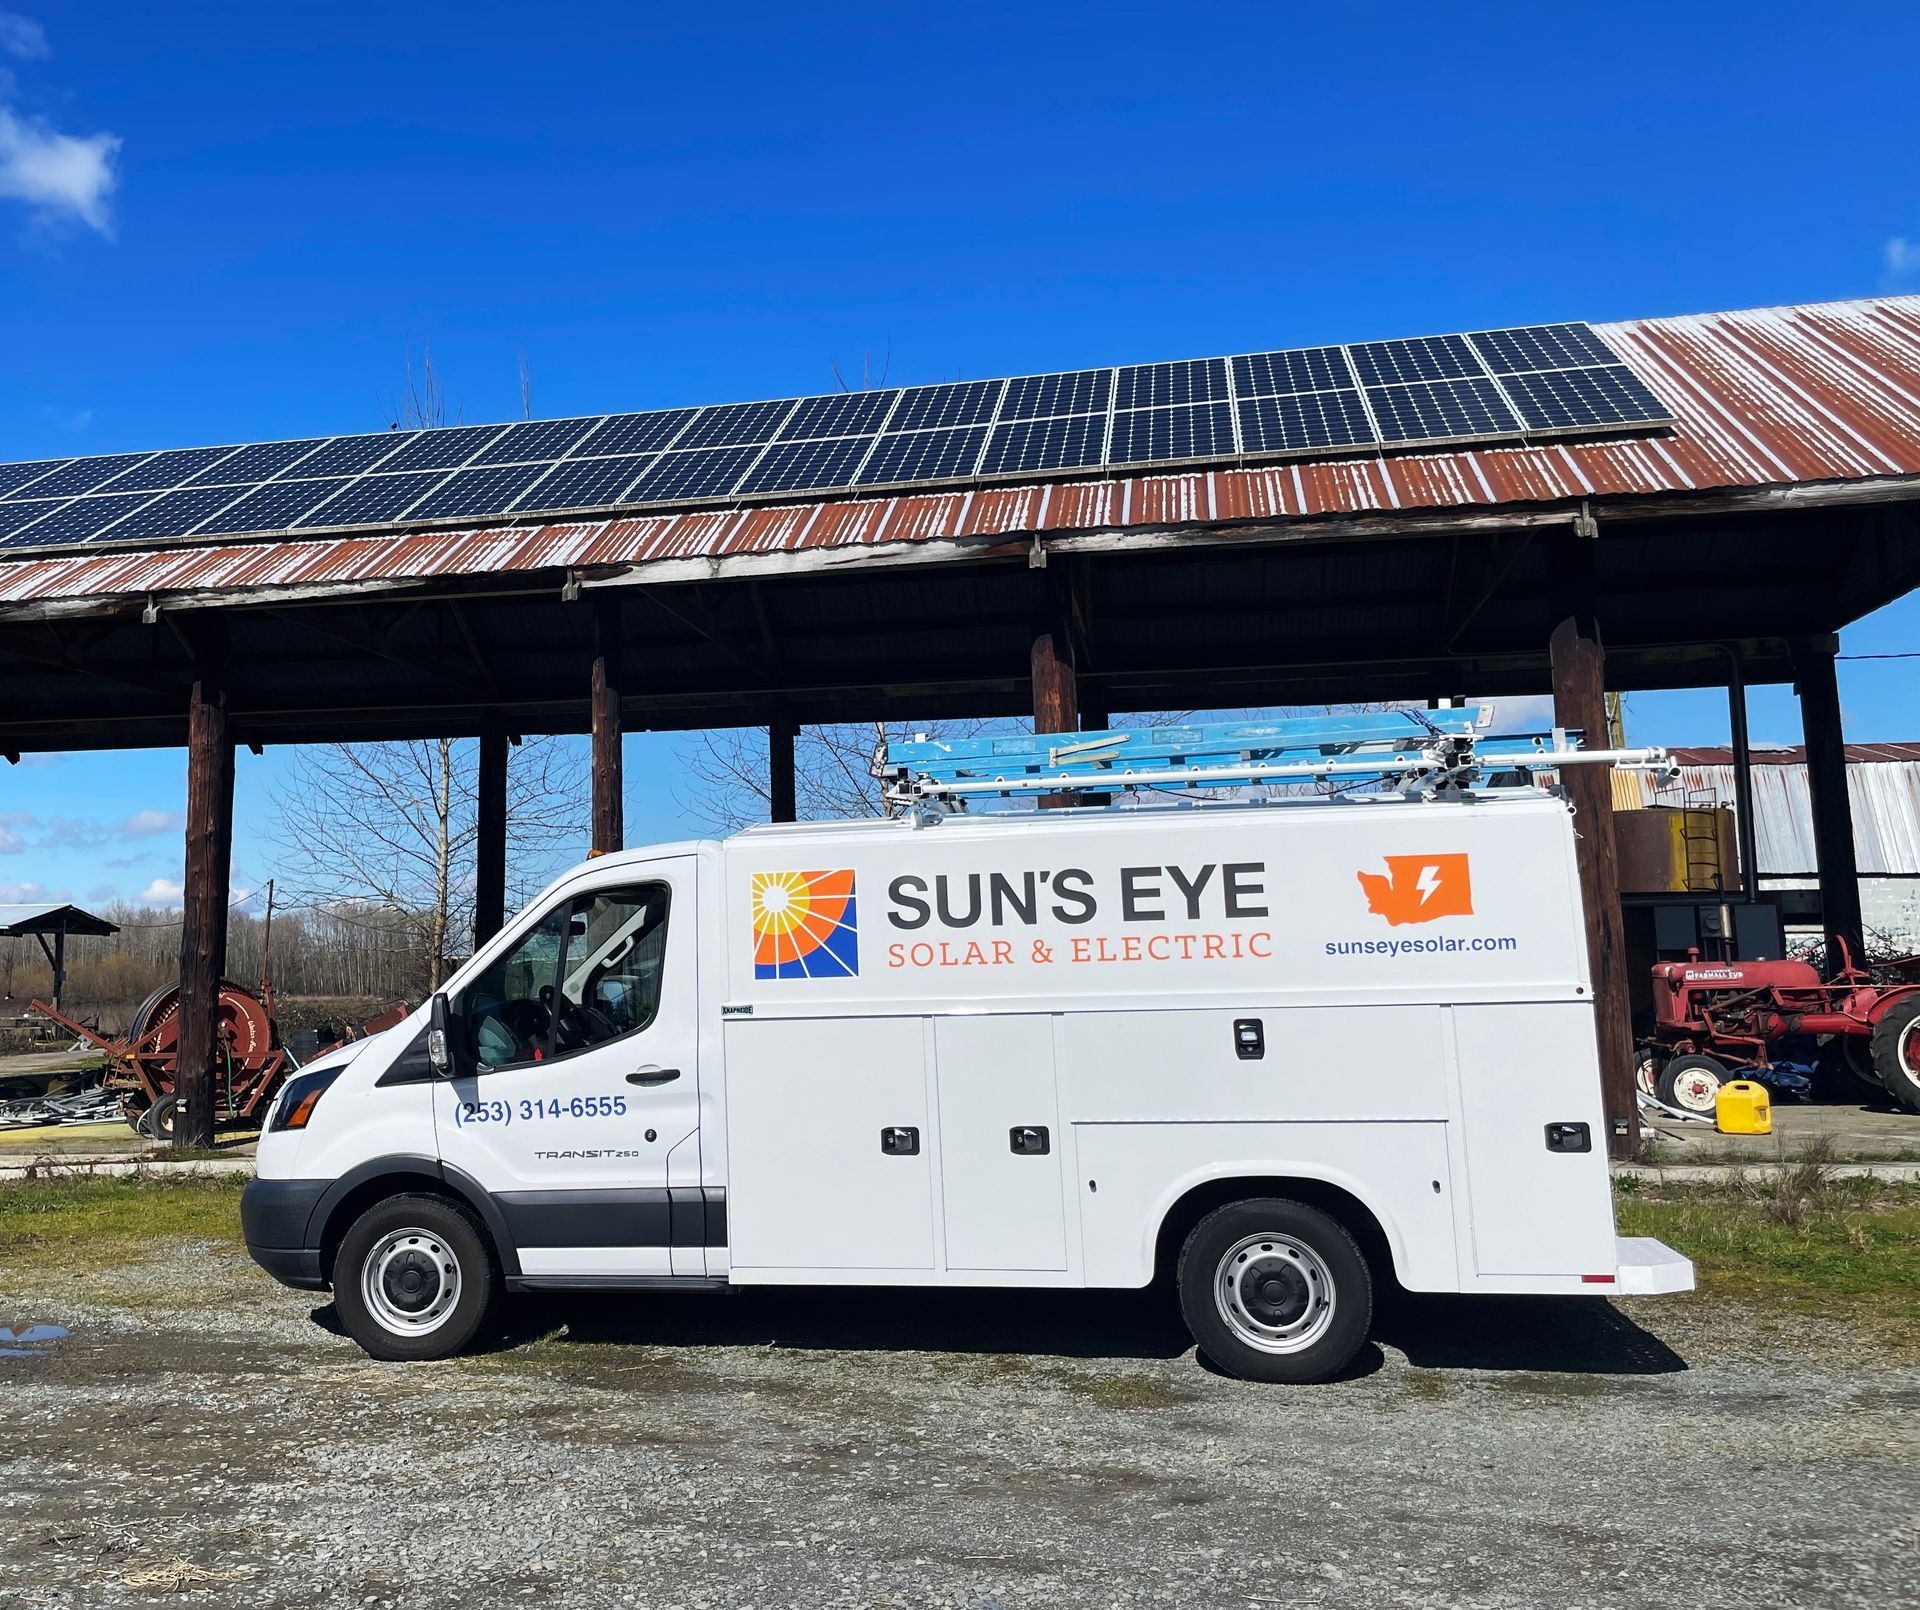 Sun's Eye Solar and Electric serves urban and rural areas in Washington State.